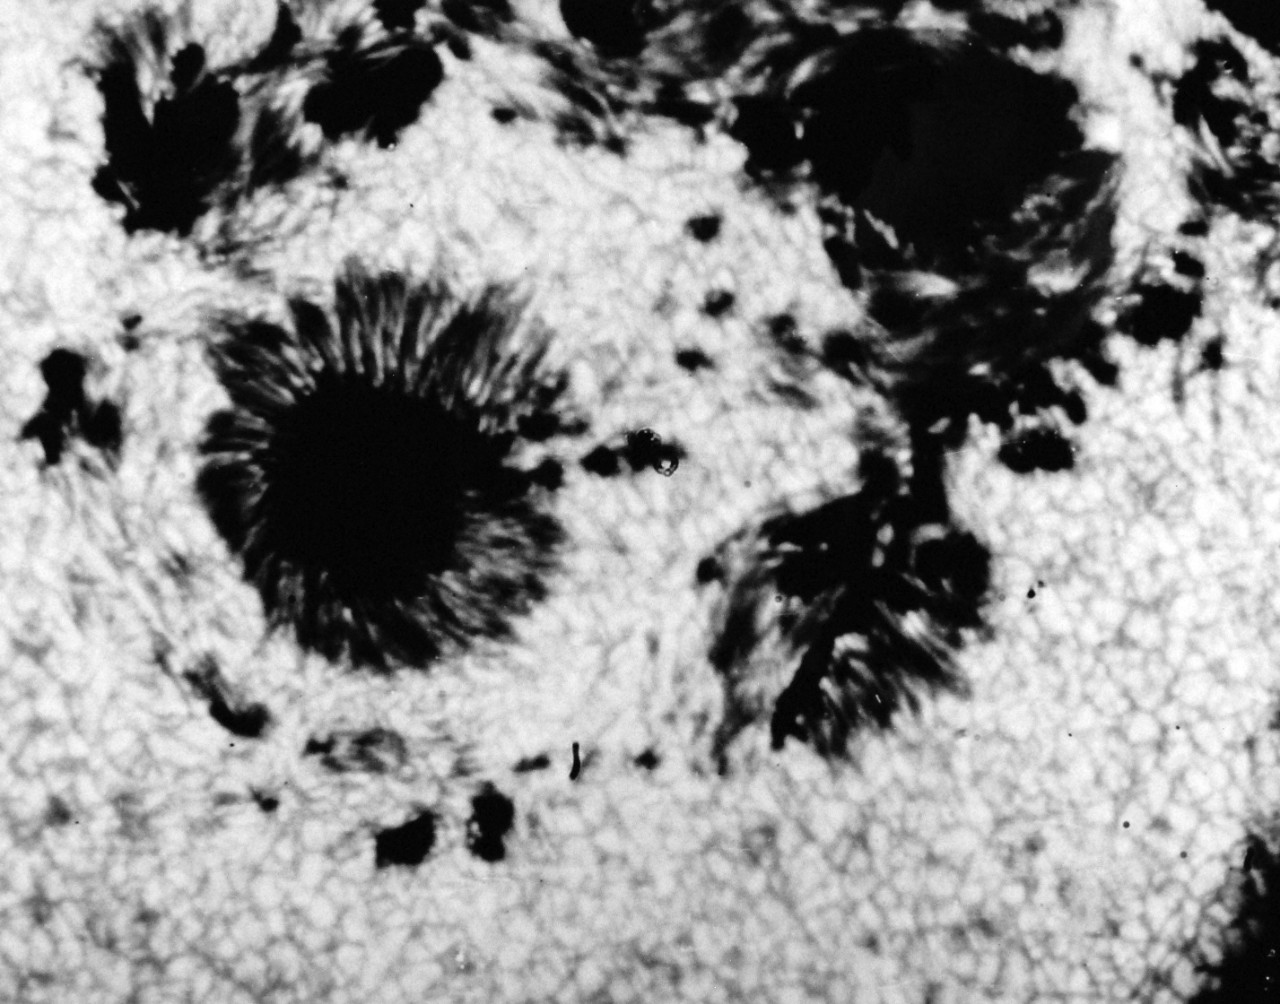 USN 710511:   U.S. Navy Balloonist Photographs Sunspots at 80,000 feet.   This extremely clear close-up photograph of part of the surface of the Sun was made above most of Earth’s atmosphere from a U.S. Navy stratoscope balloon at 80,000  feet of 17 August 1959.   The black spots consist of dark cores of relatively y cool gases emebbed in strong magnetic fields.  The cores are surrounded by envelopes composed of wispi filaments of outward-moving warmer gases.  The whole spot group is embedded in hot gases covering the entire surface of the Sun.  These gases produced a magnetic storm and major disturbances in long range radio communications on Earth on 16 August 1959, the day before the balloon flight.  The Office of Naval Research and the National Science Foundation sponsored the stratoscope flight, 17 August 1959.   Photograph released on 4 September 1959.  Official U.S. Navy photograph, now in the collections of the National Archives.     